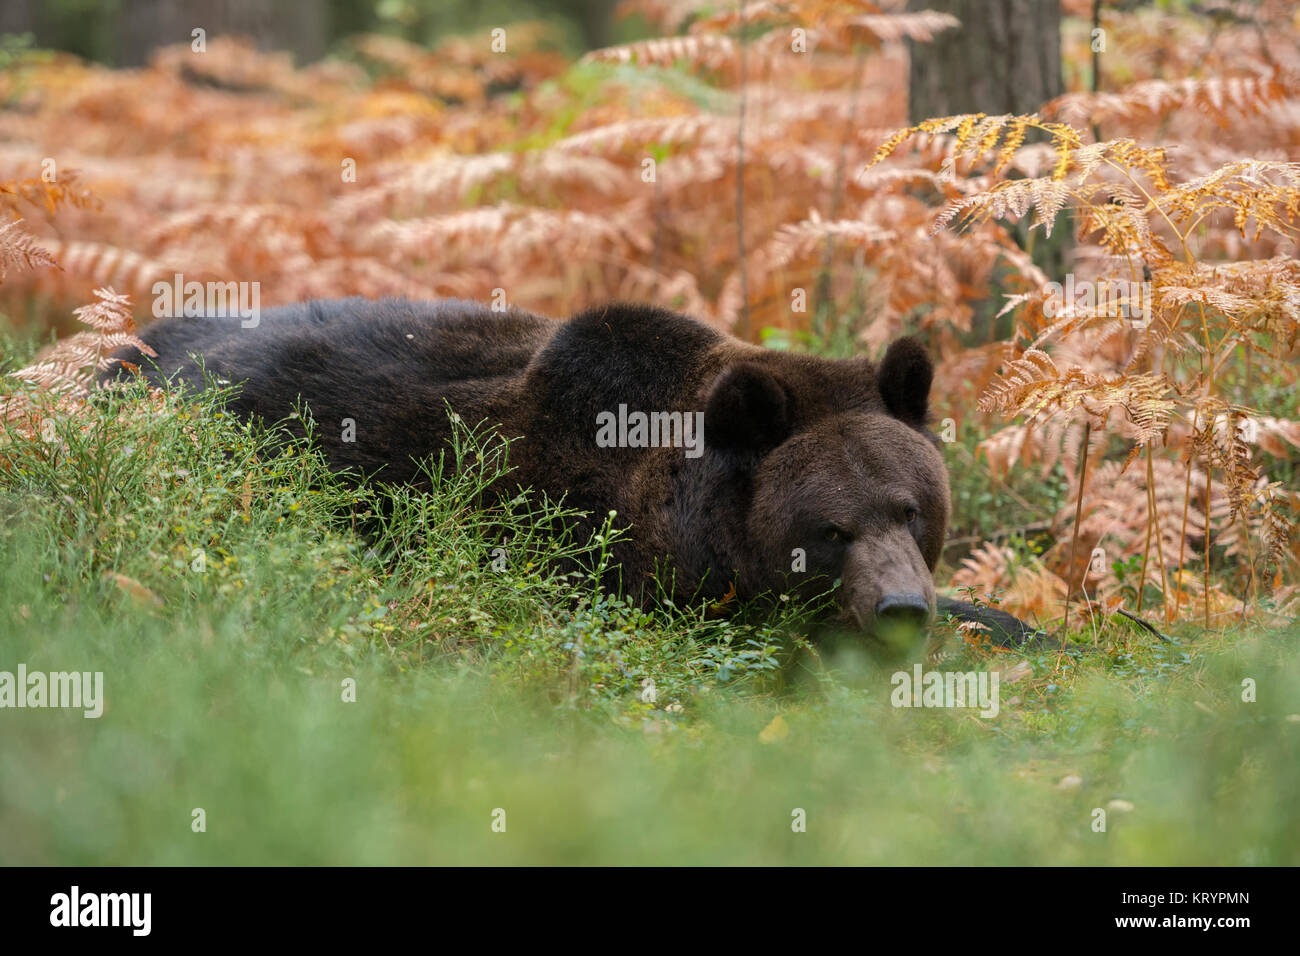 European Brown Bear / Braunbaer ( Ursus arctos ), lying, resting, hiding in the undergrowth of a forest, Europe. Stock Photo